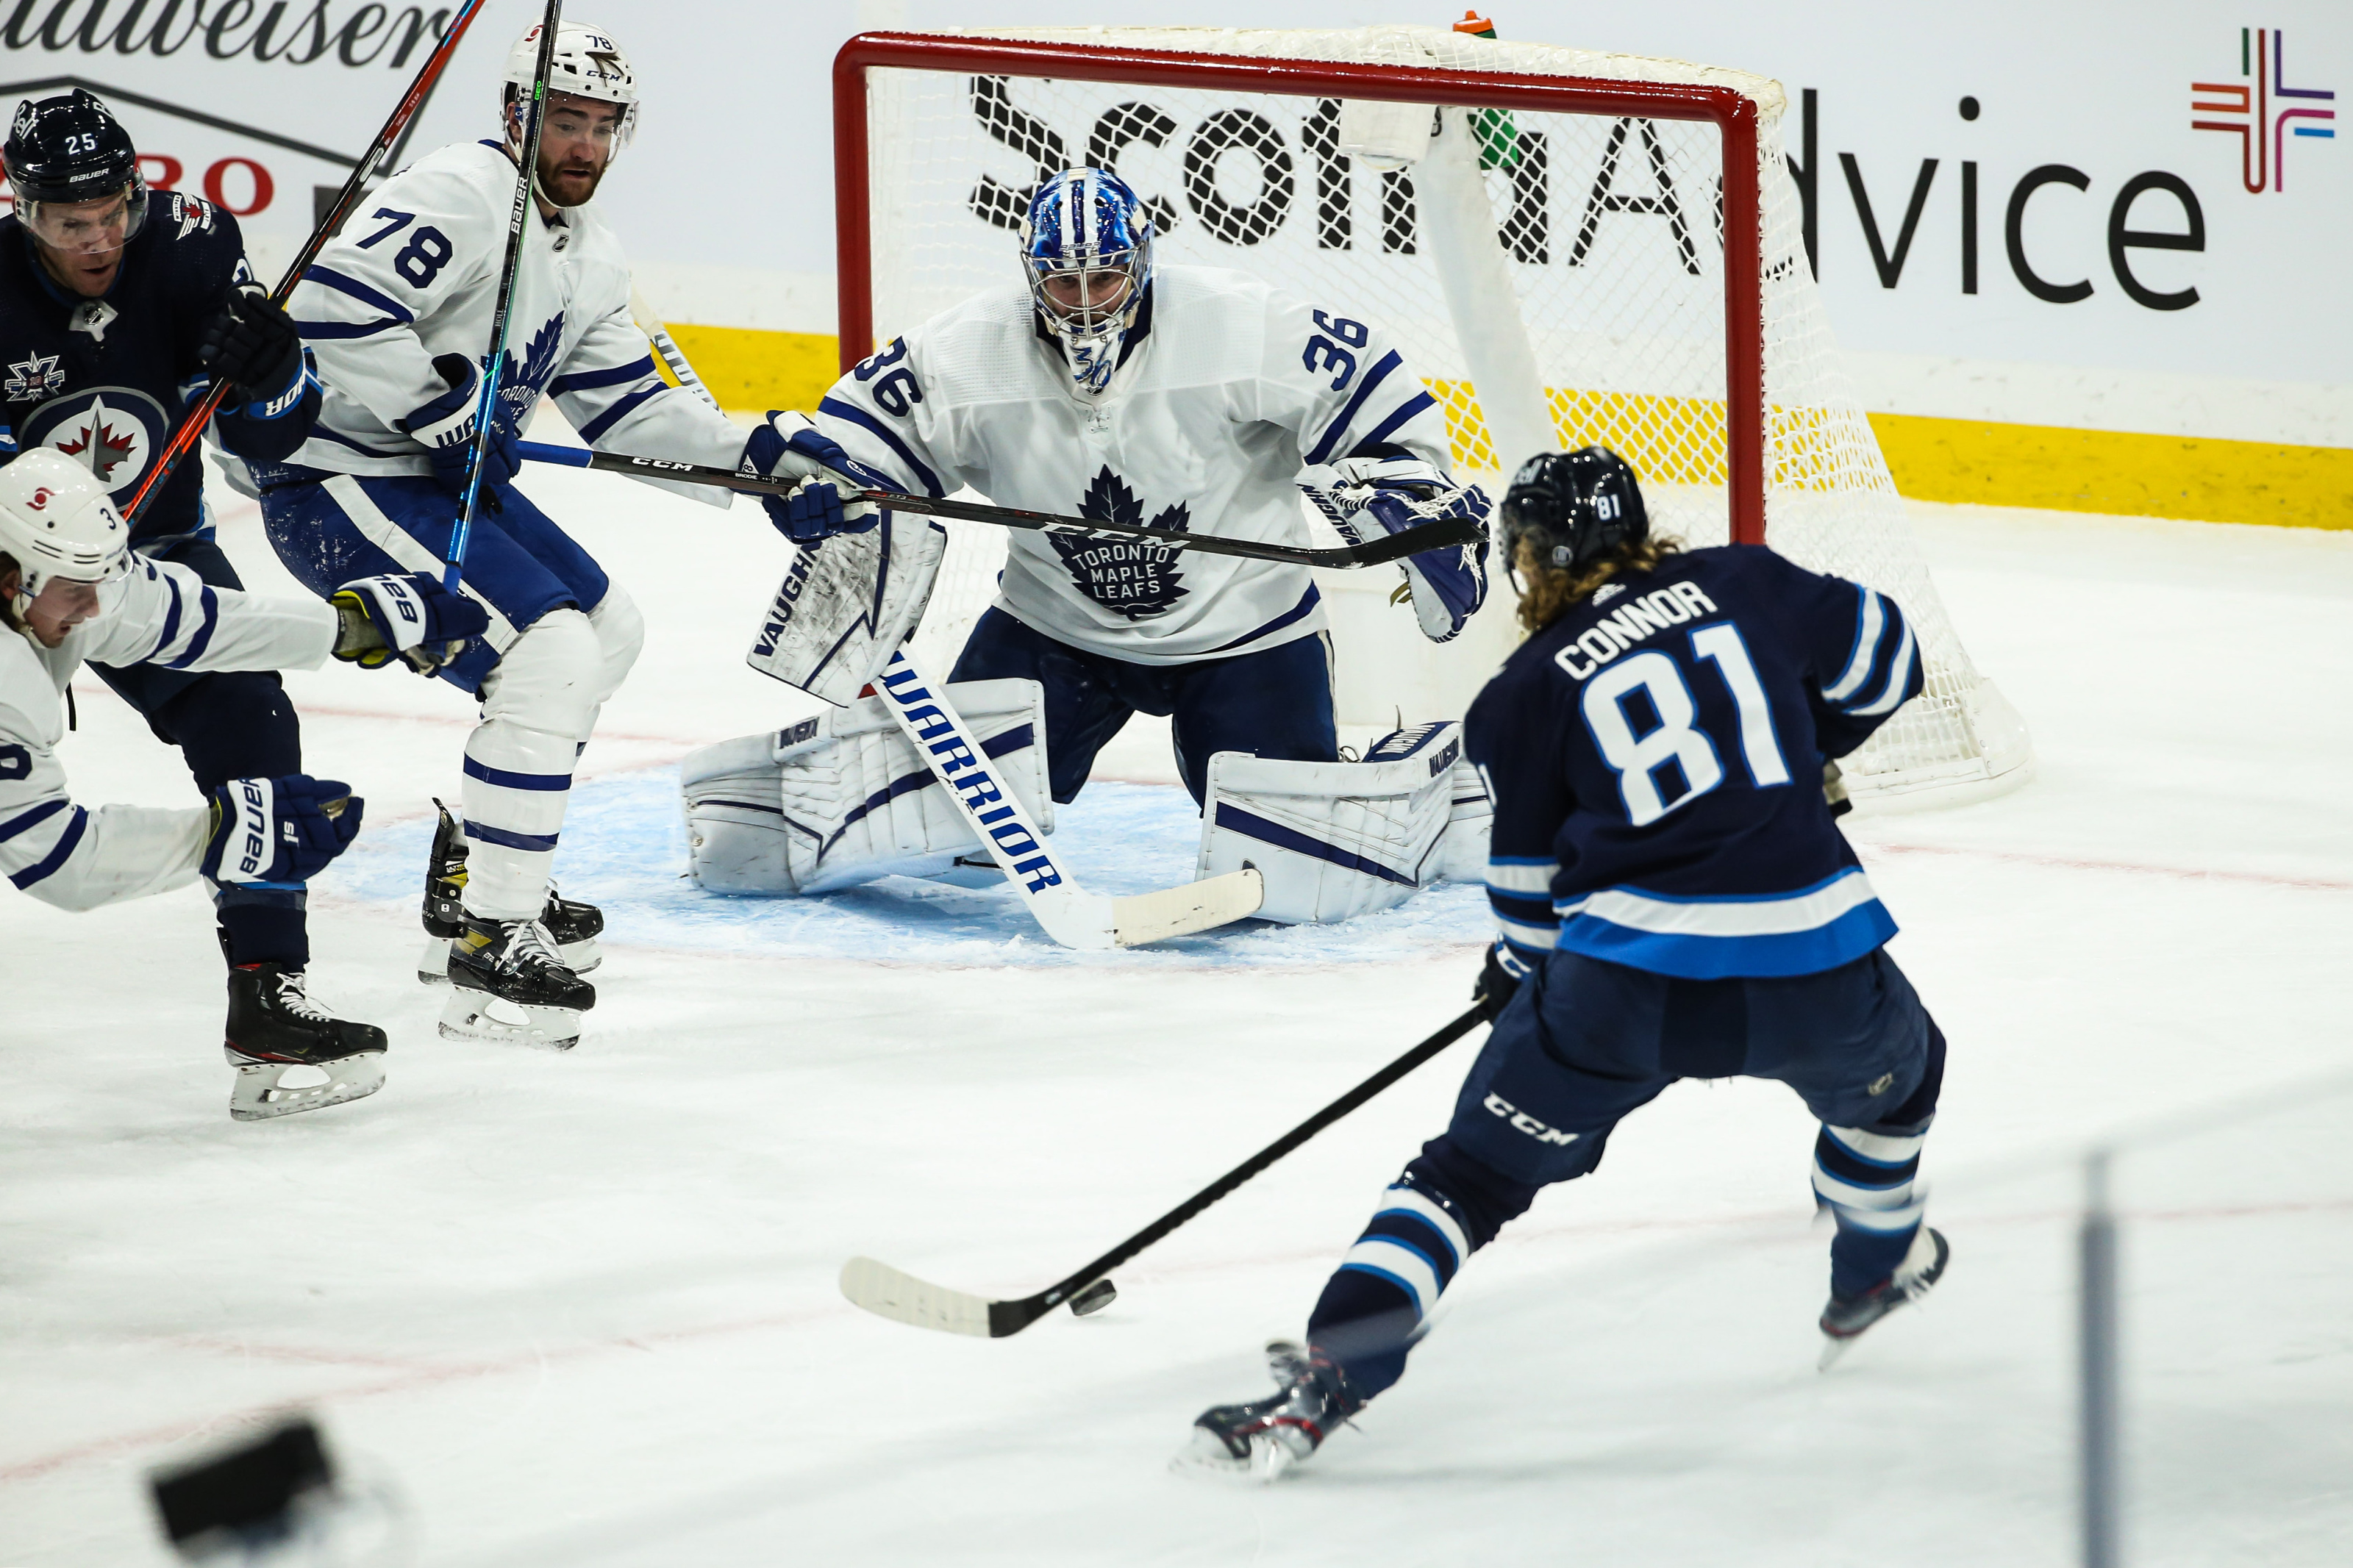 Winnipeg Jets vs Maple Leafs Preview: Jets Look to Bounce Back